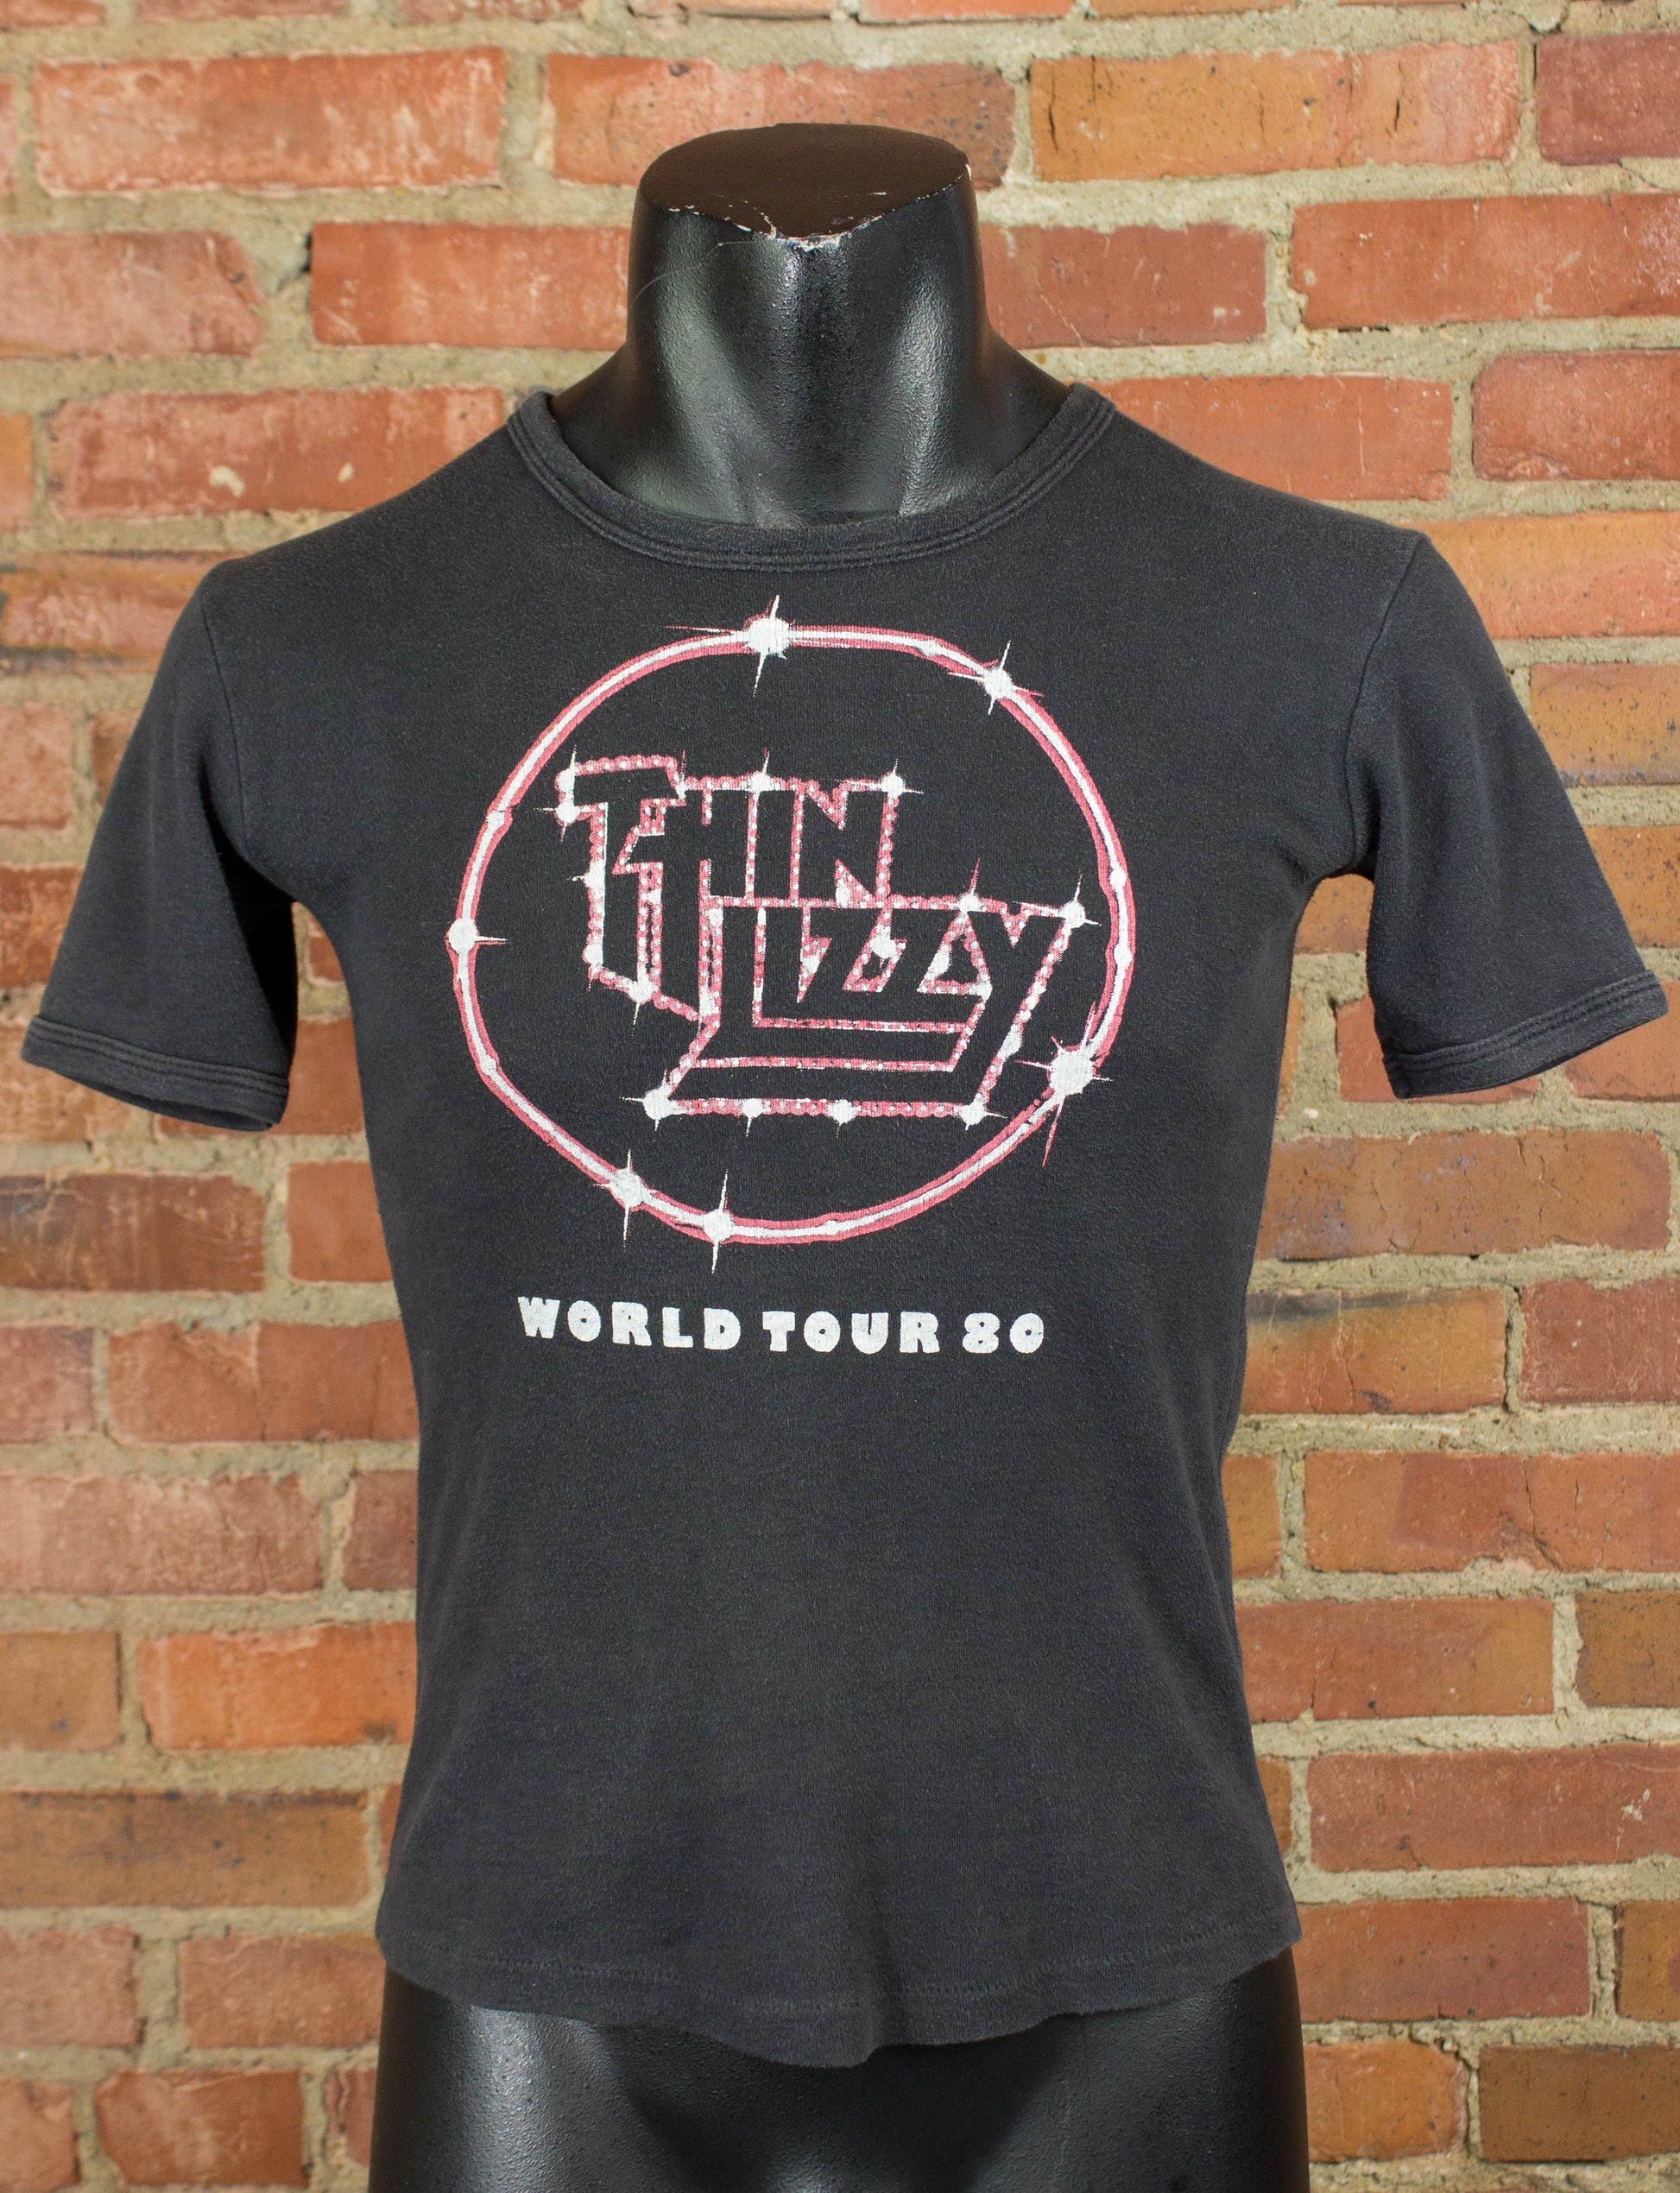 Vintage Thin Lizzy Concert T Shirt 1980 Chinatown UK Tour Black Small